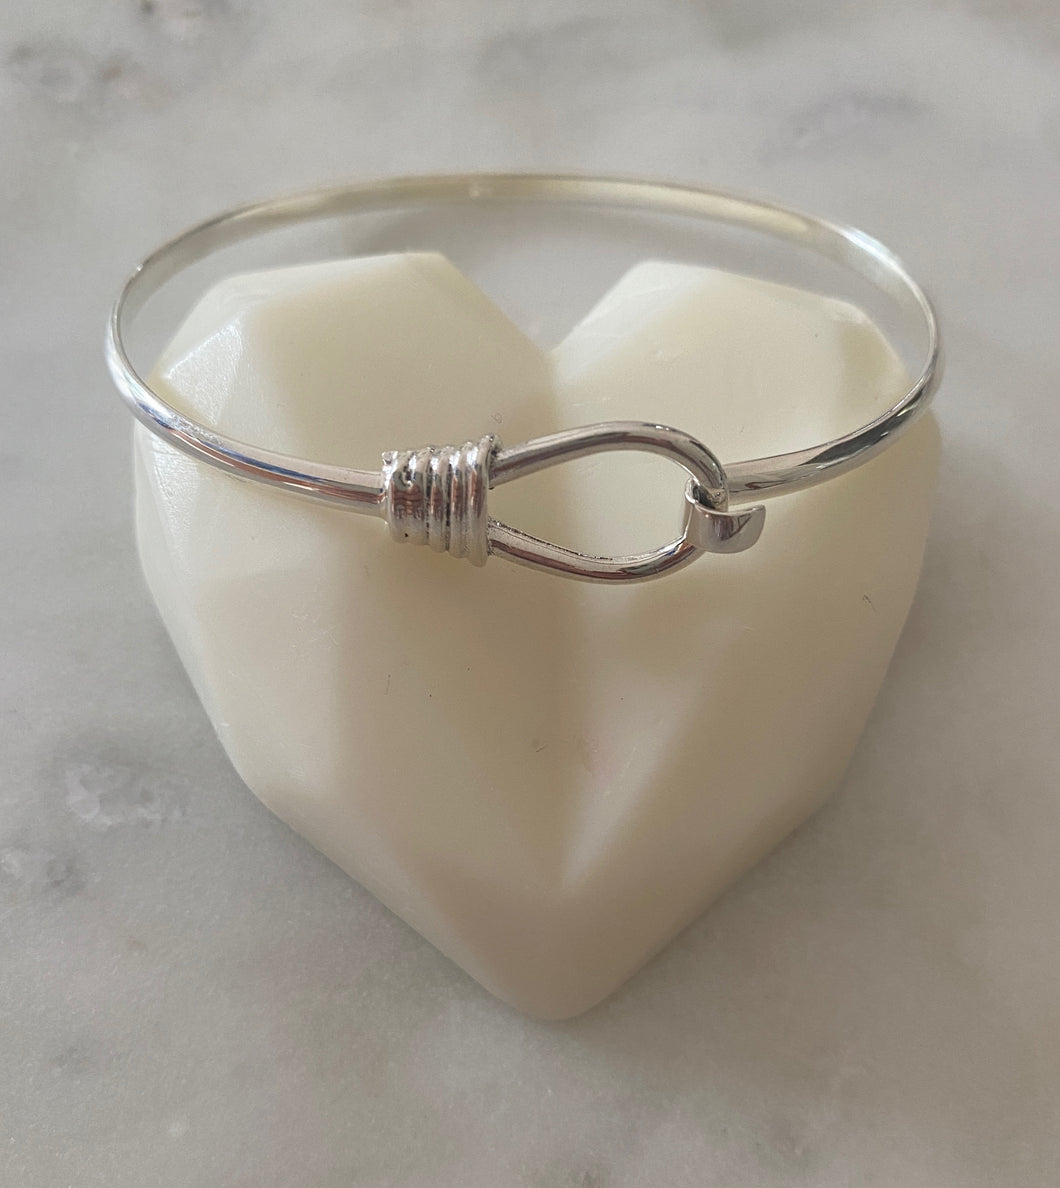 Loop and latch silver bangle